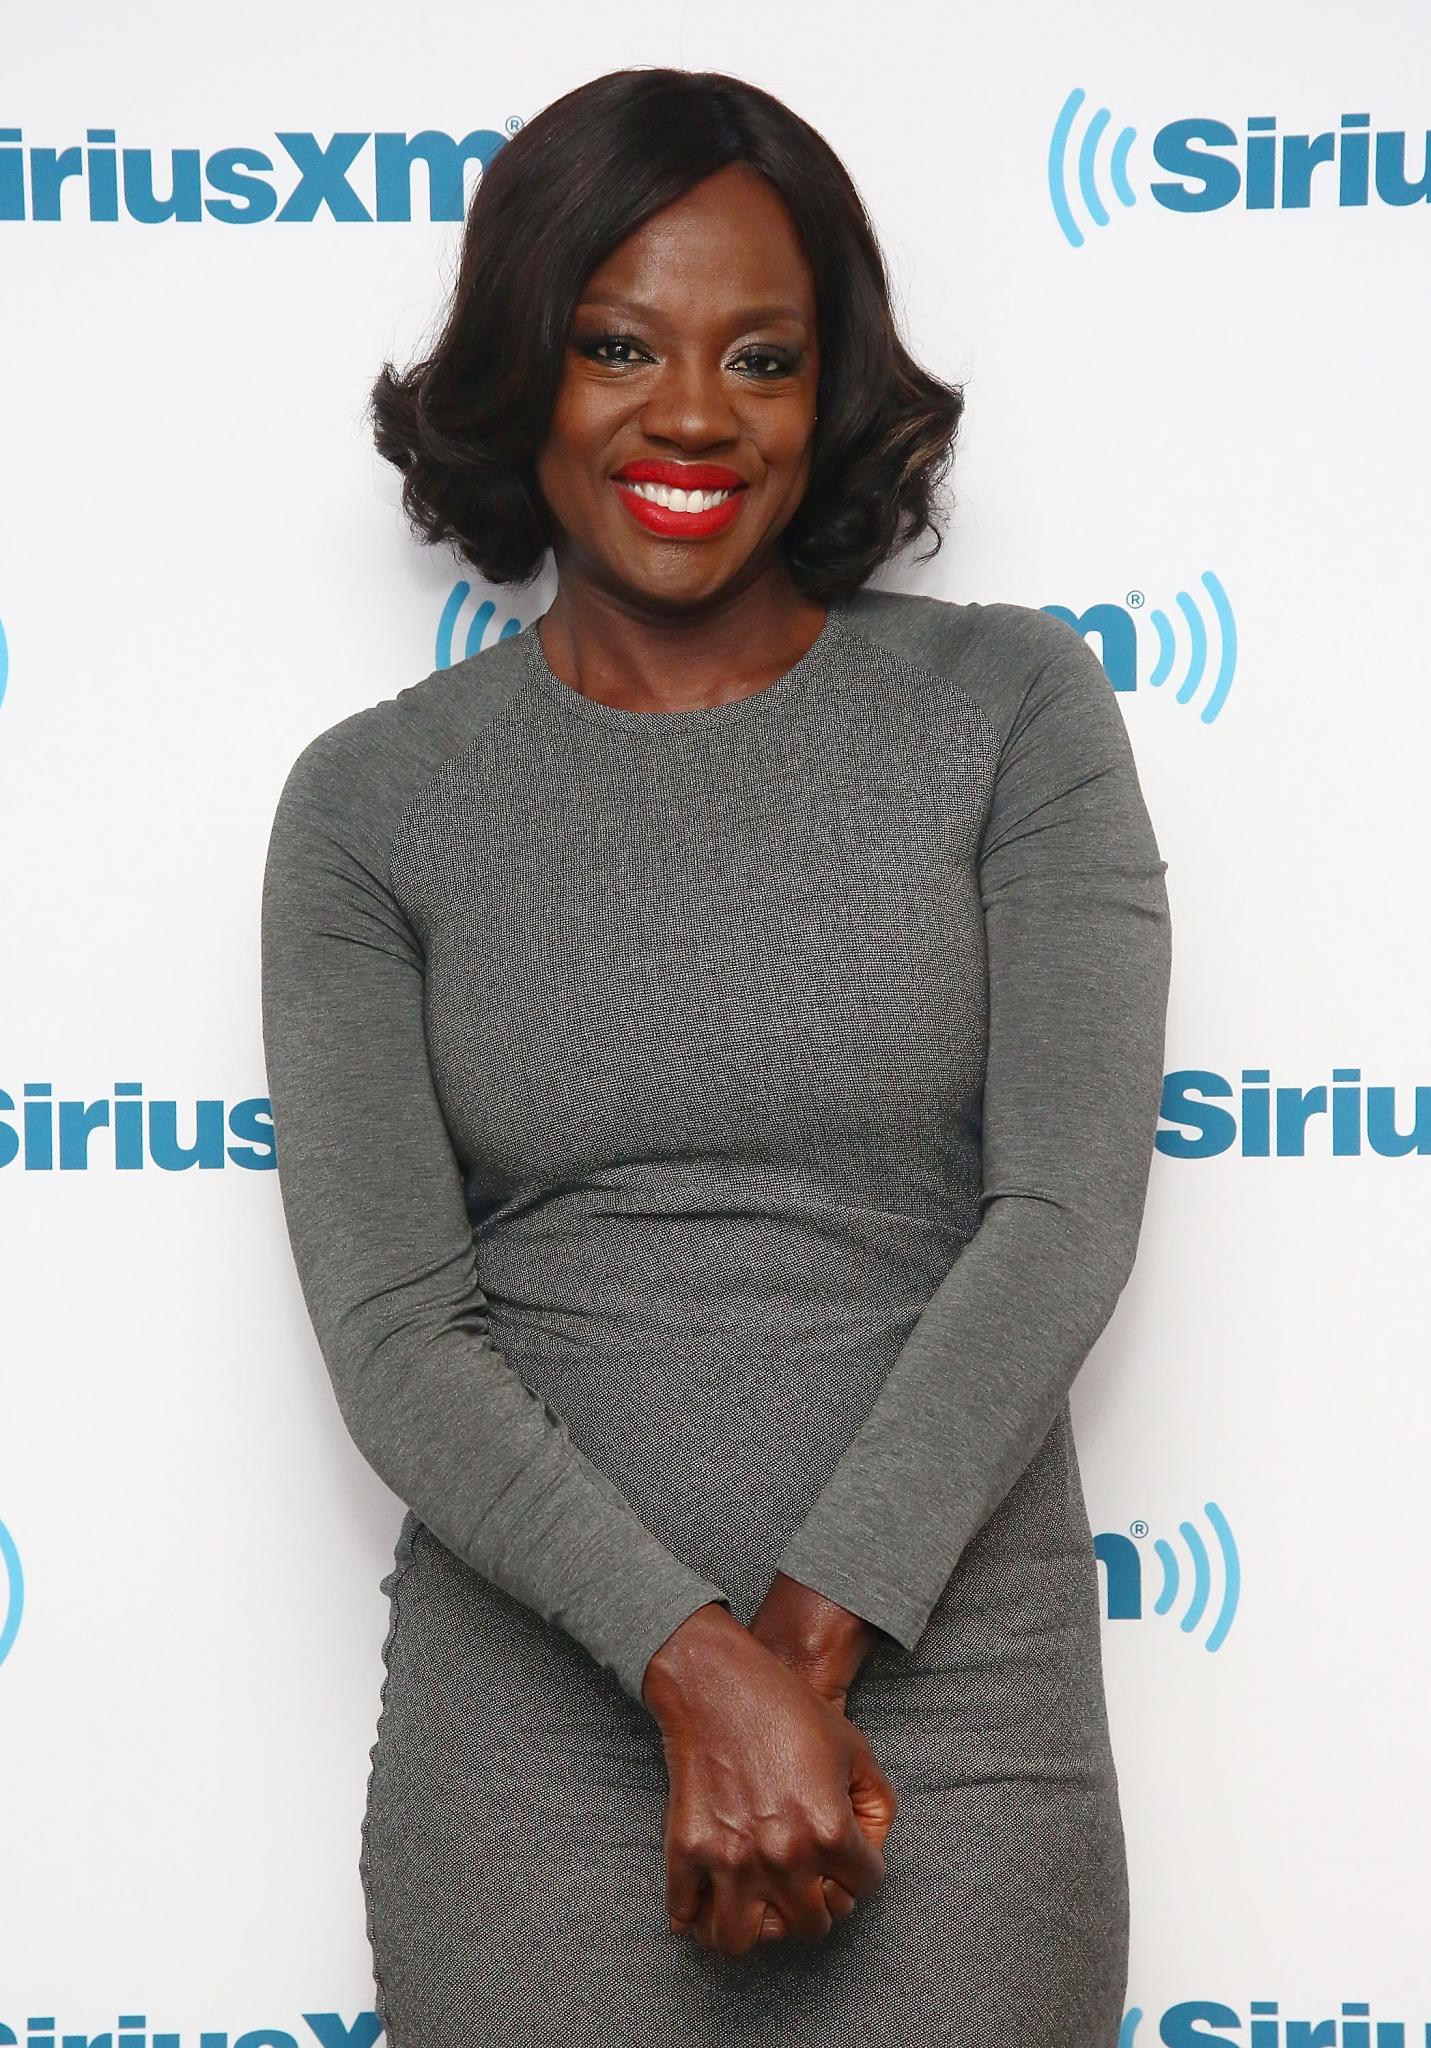 Viola Davis Reveals the Questions She'd Like to Be Asked on the Red Carpet
